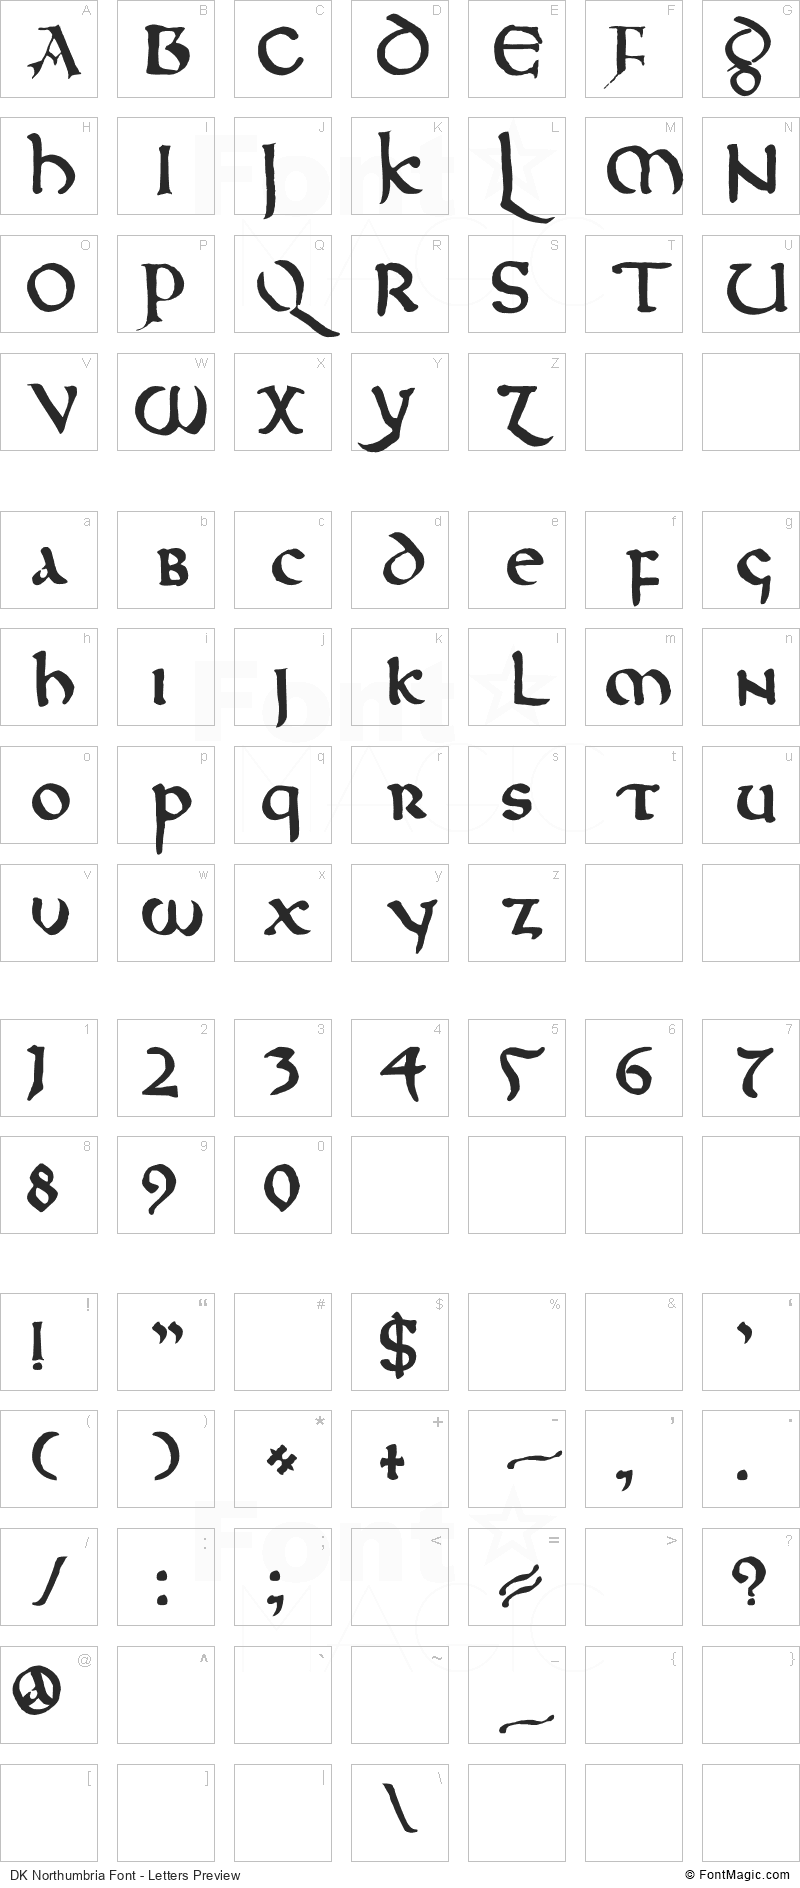 DK Northumbria Font - All Latters Preview Chart